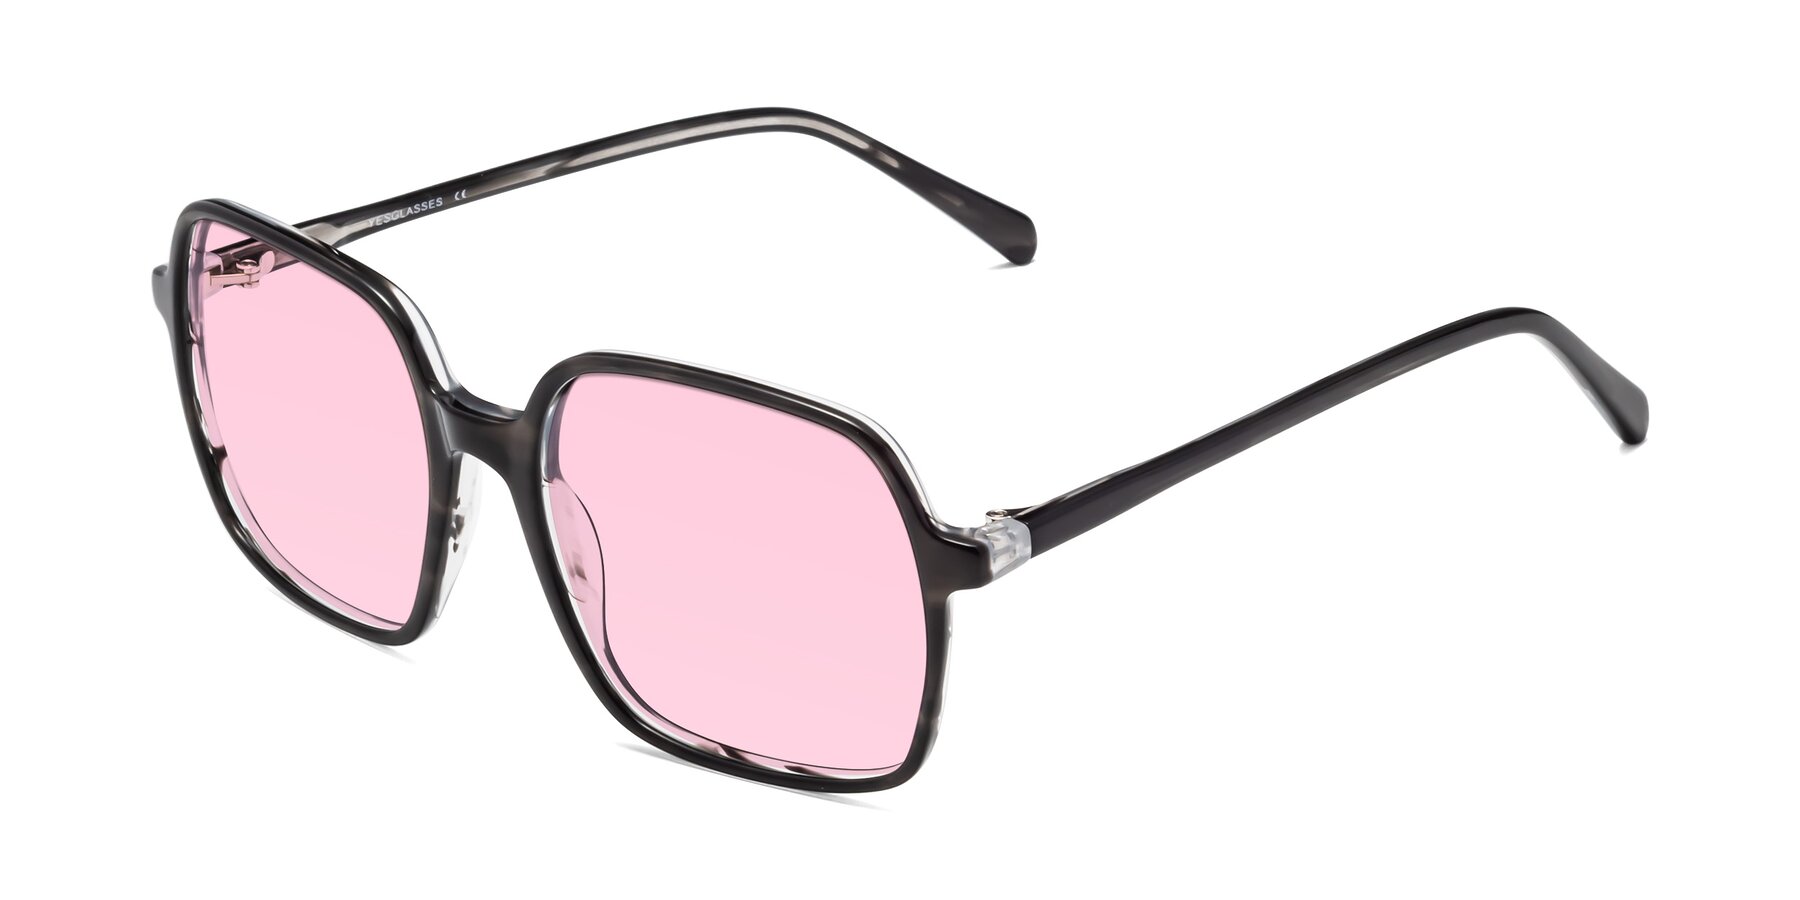 Angle of 1463 in Gray with Light Pink Tinted Lenses